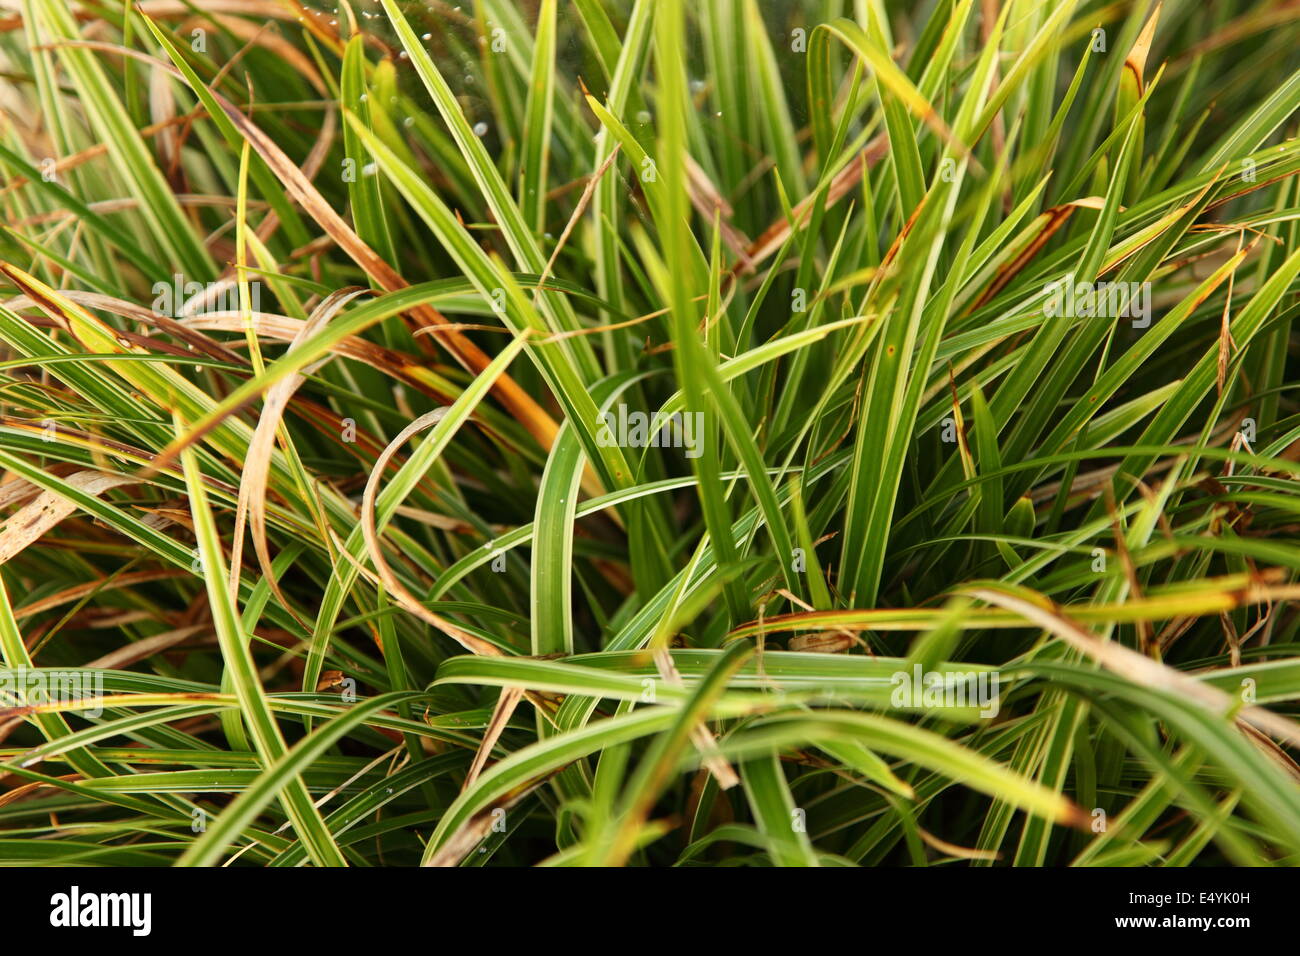 Blades of green and dried grass Stock Photo